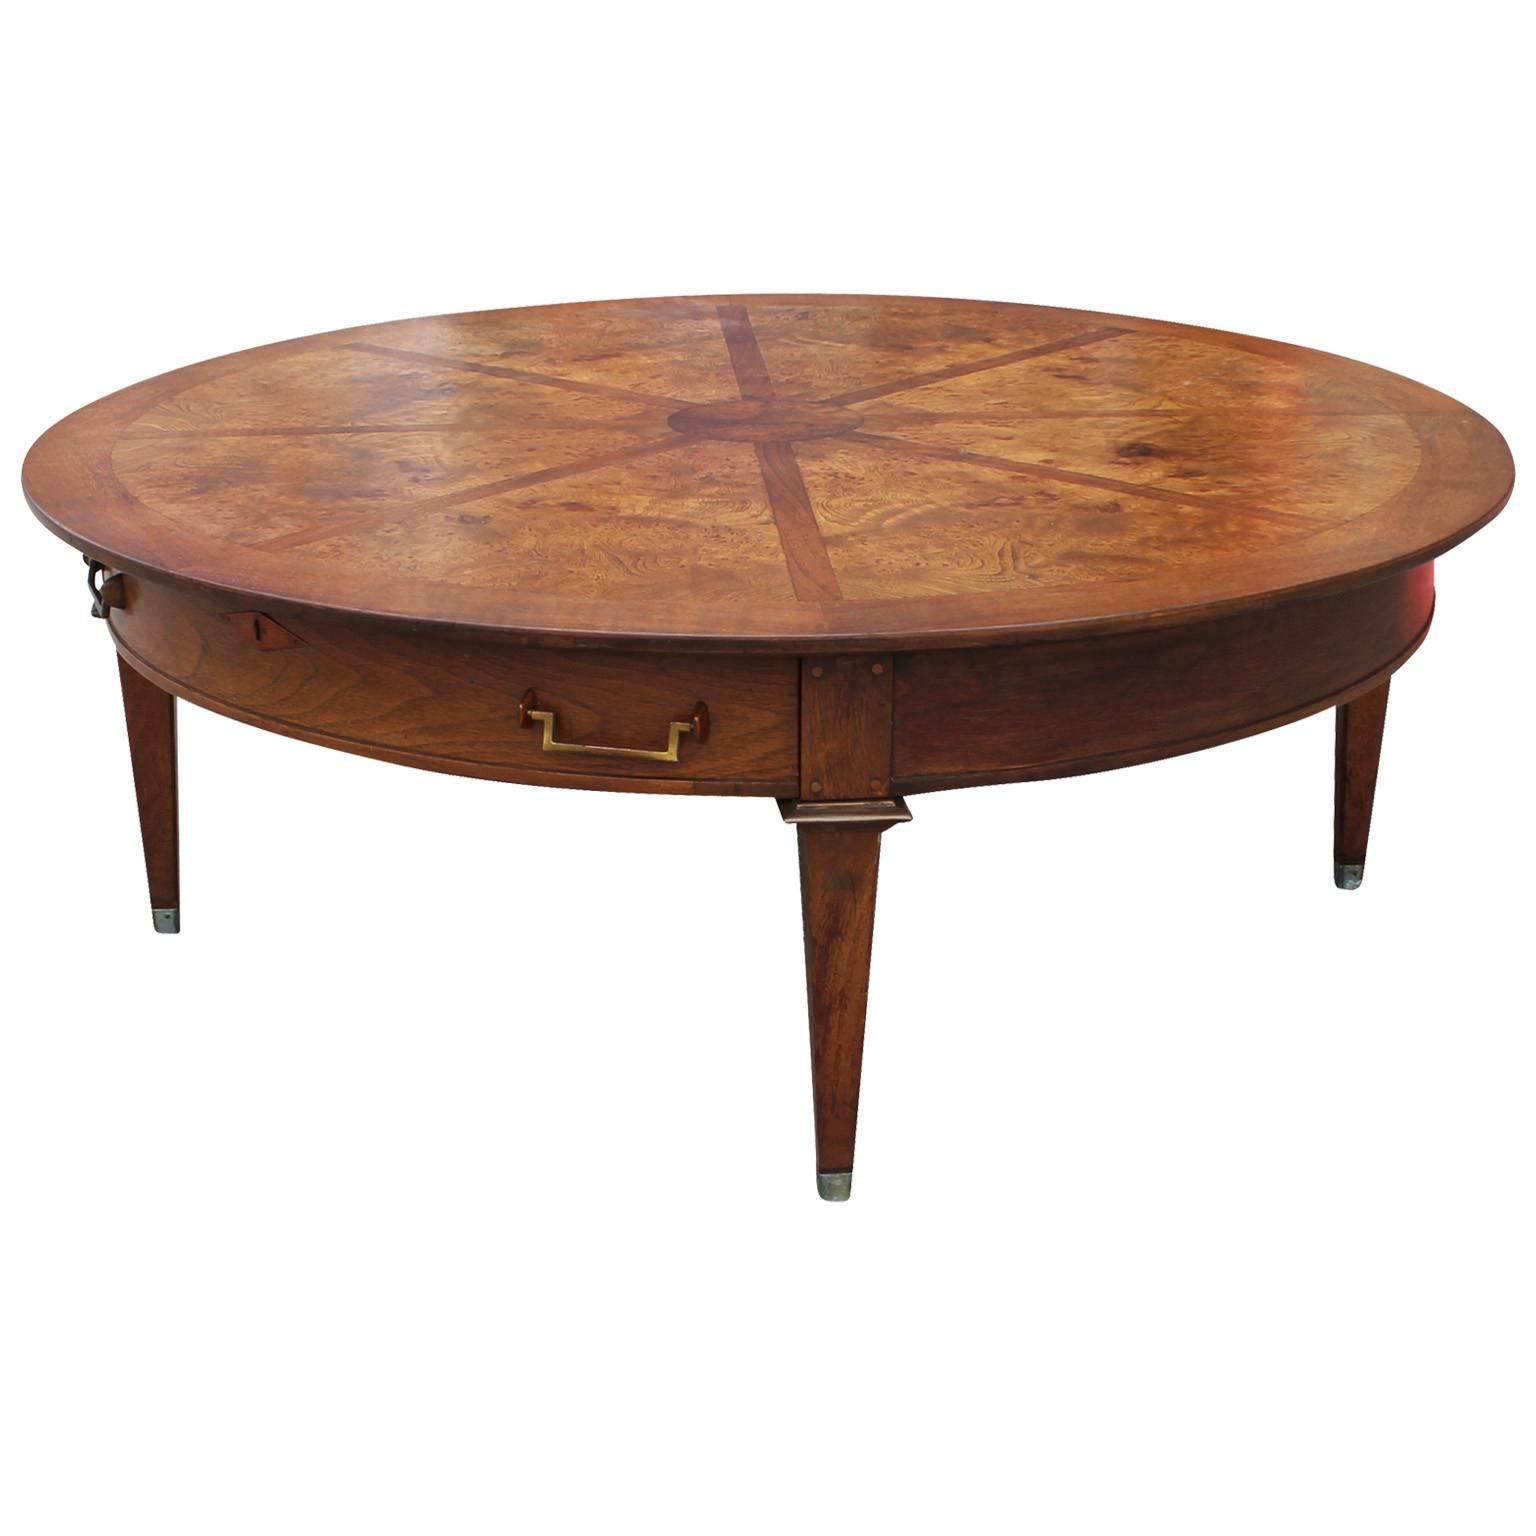 Excellent round coffee table by Mastercraft. Transitional style table has beautiful inlaid burl detailing. A single drawer is accented with copper hardware.